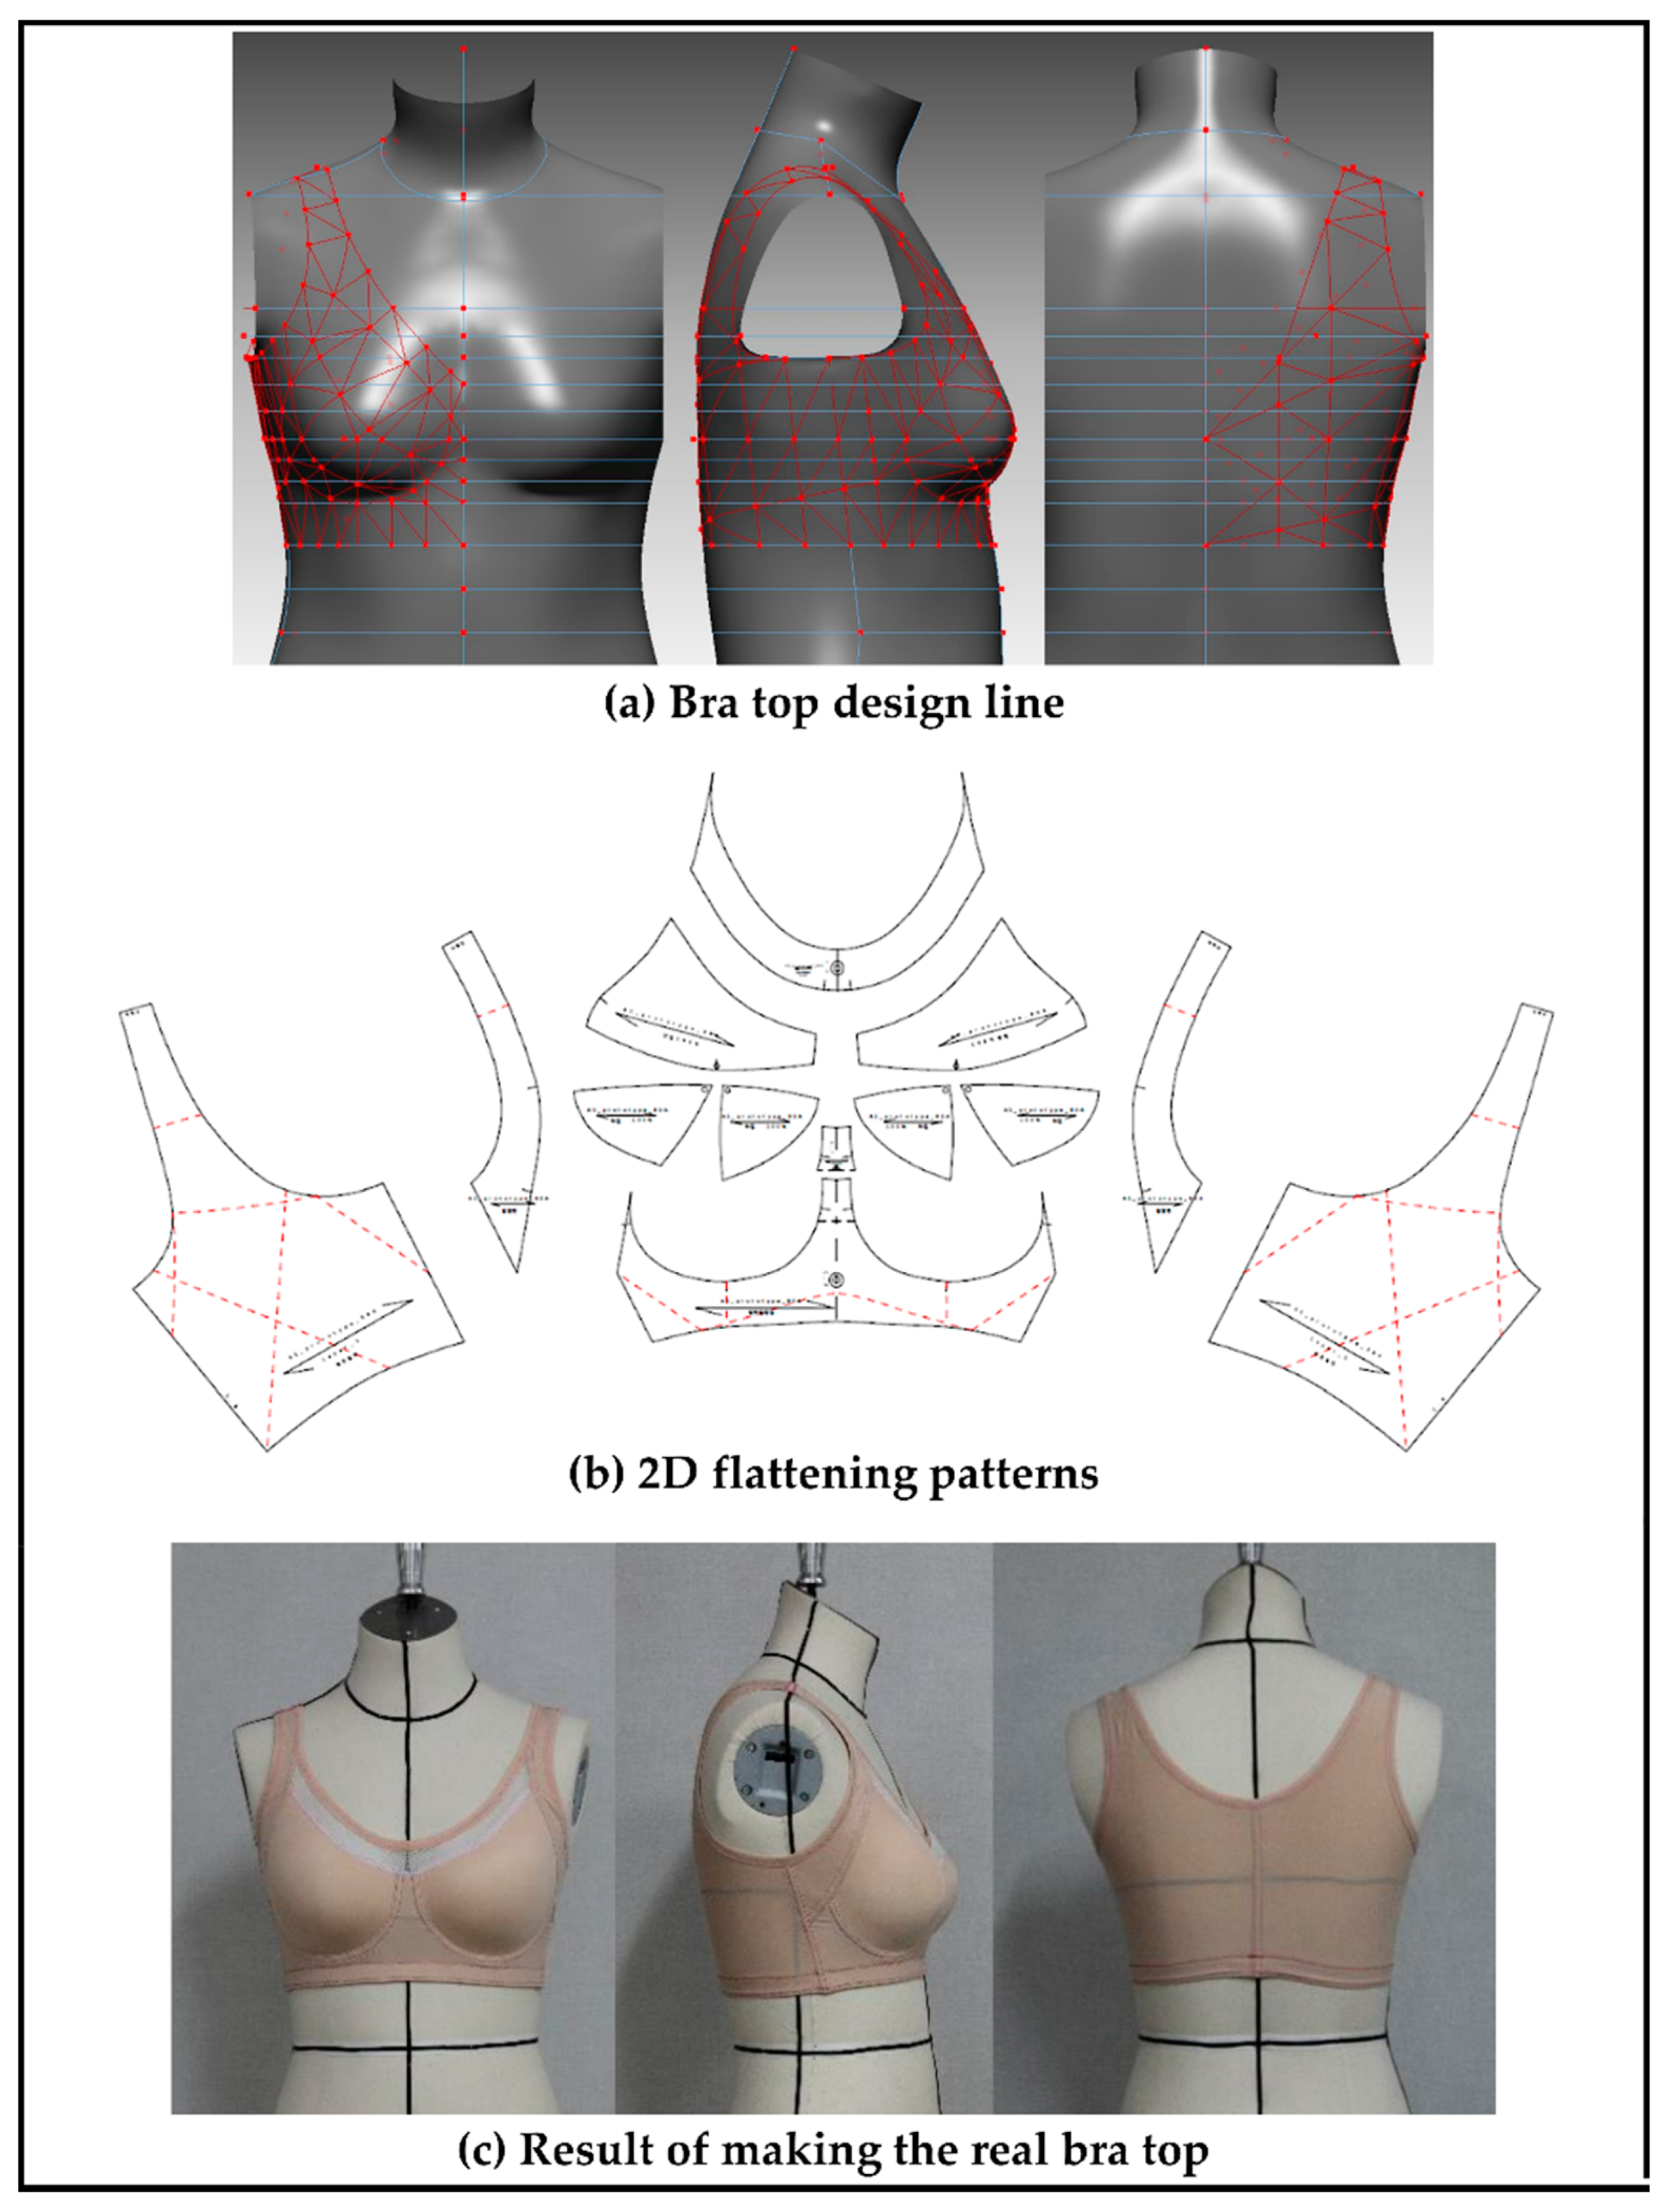 Conventional standard-sized bra with prosthesis or patient's bra with  customized hand-knitted external prosthesis after mastectomy: Mixed-methods  evaluation of patients' preferences - IOS Press